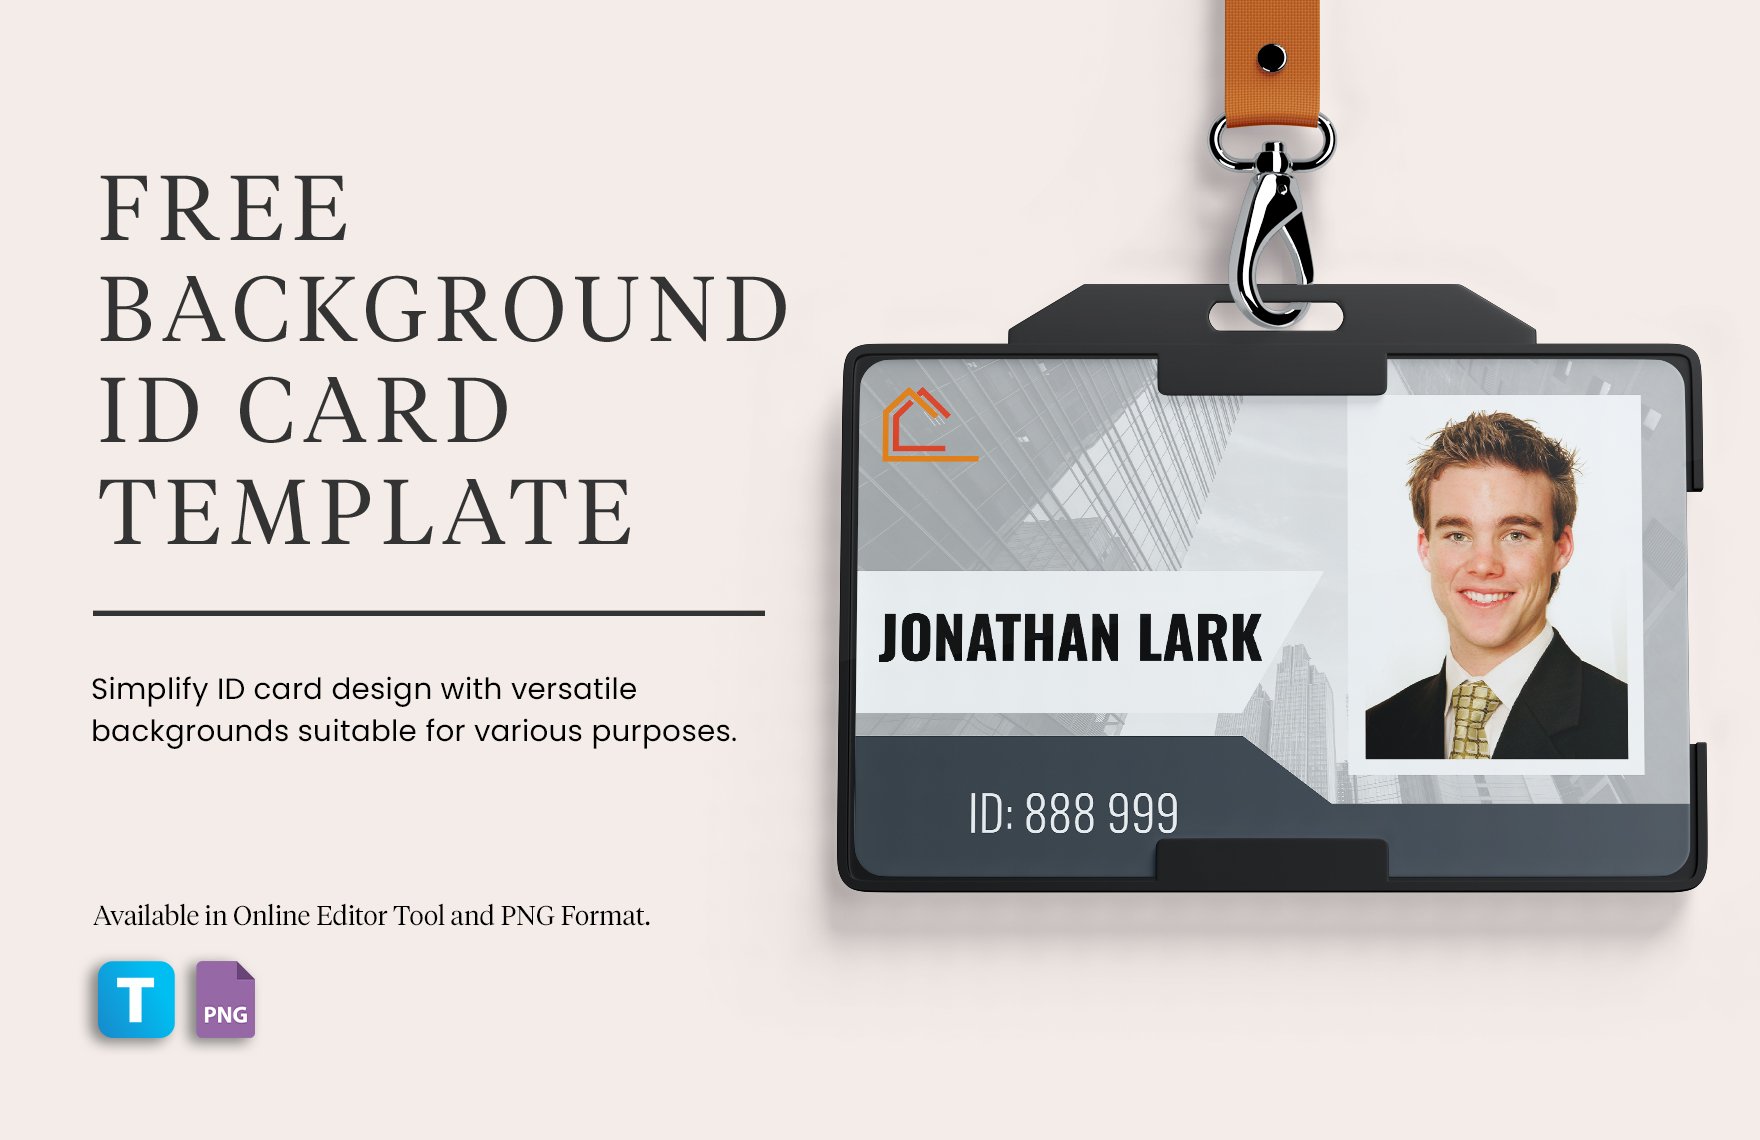 Background ID Card Template